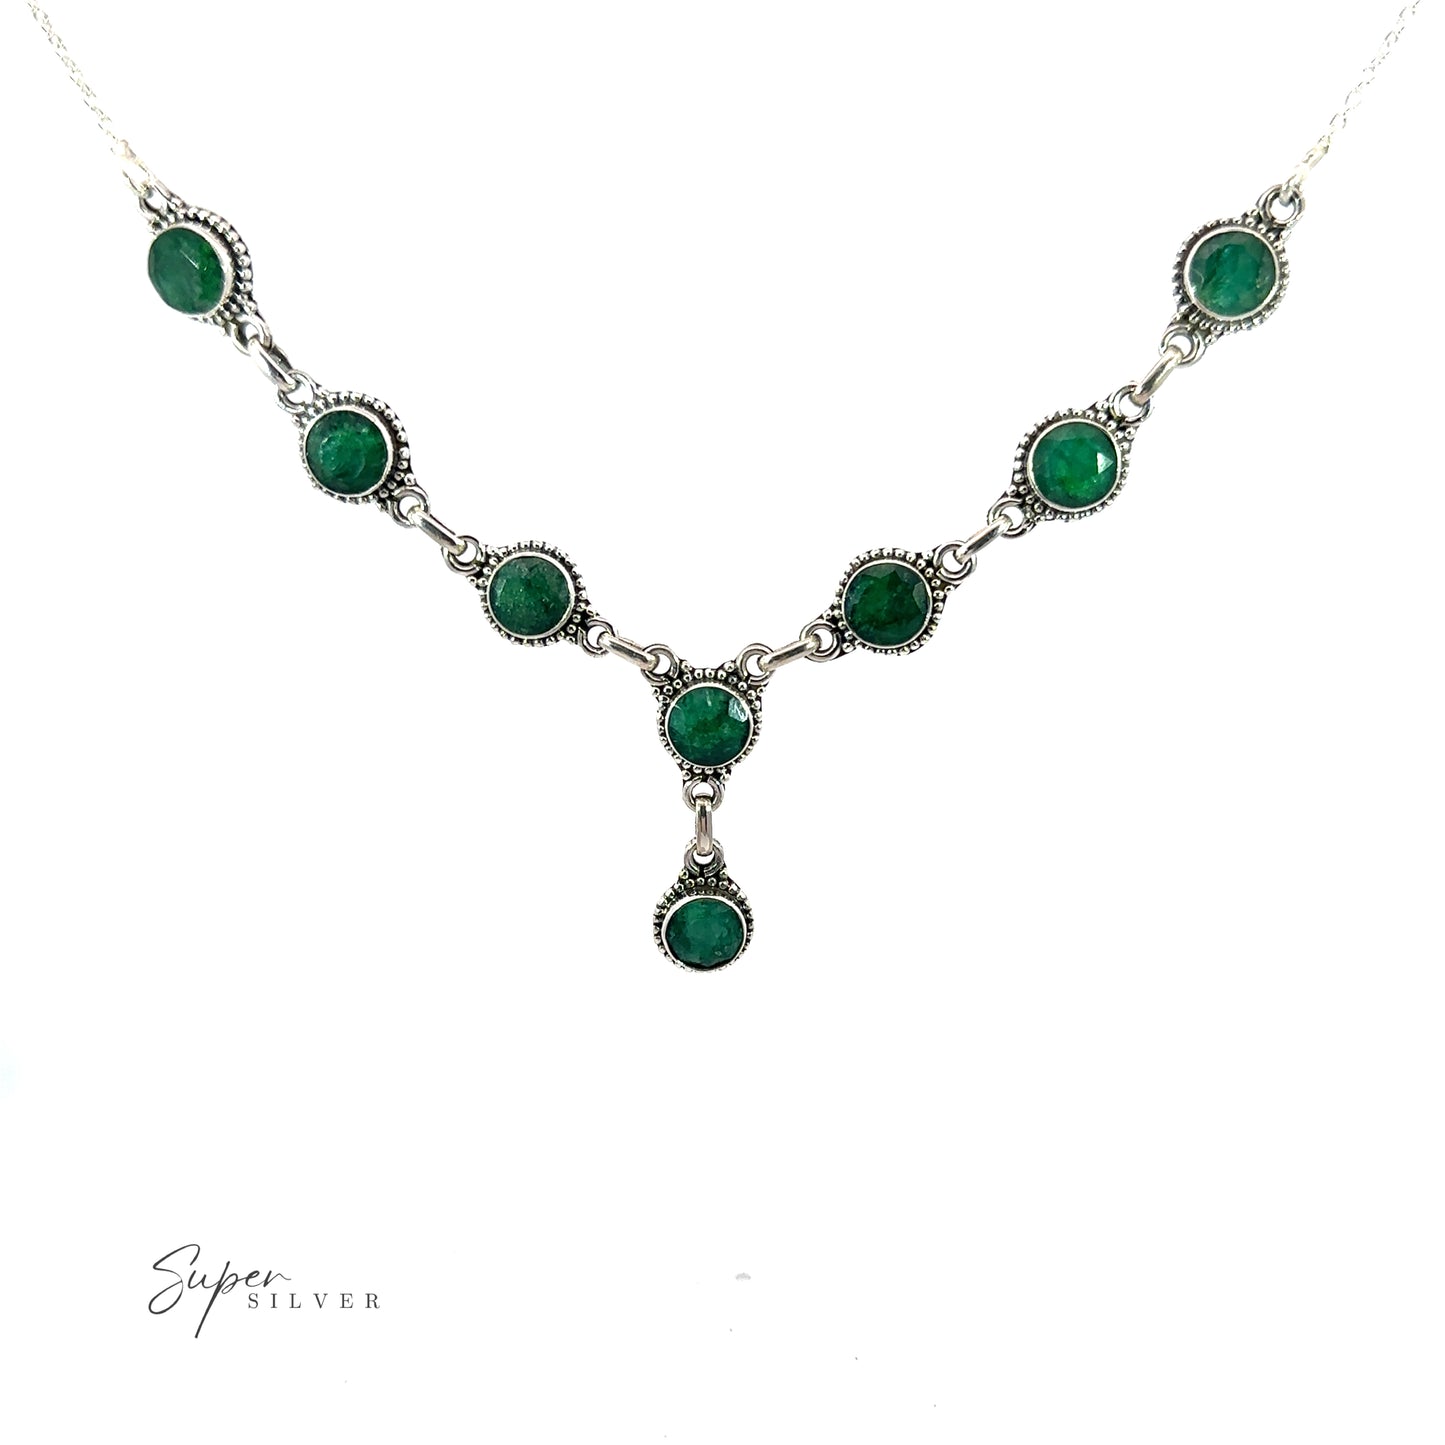 
                  
                    A Round Gemstone Y Necklace with Ball Border with green gemstones arranged in a V-shape, featuring the branded text "Super Silver" at the bottom left. This bohemian style jewelry piece effortlessly combines elegance and charm.
                  
                